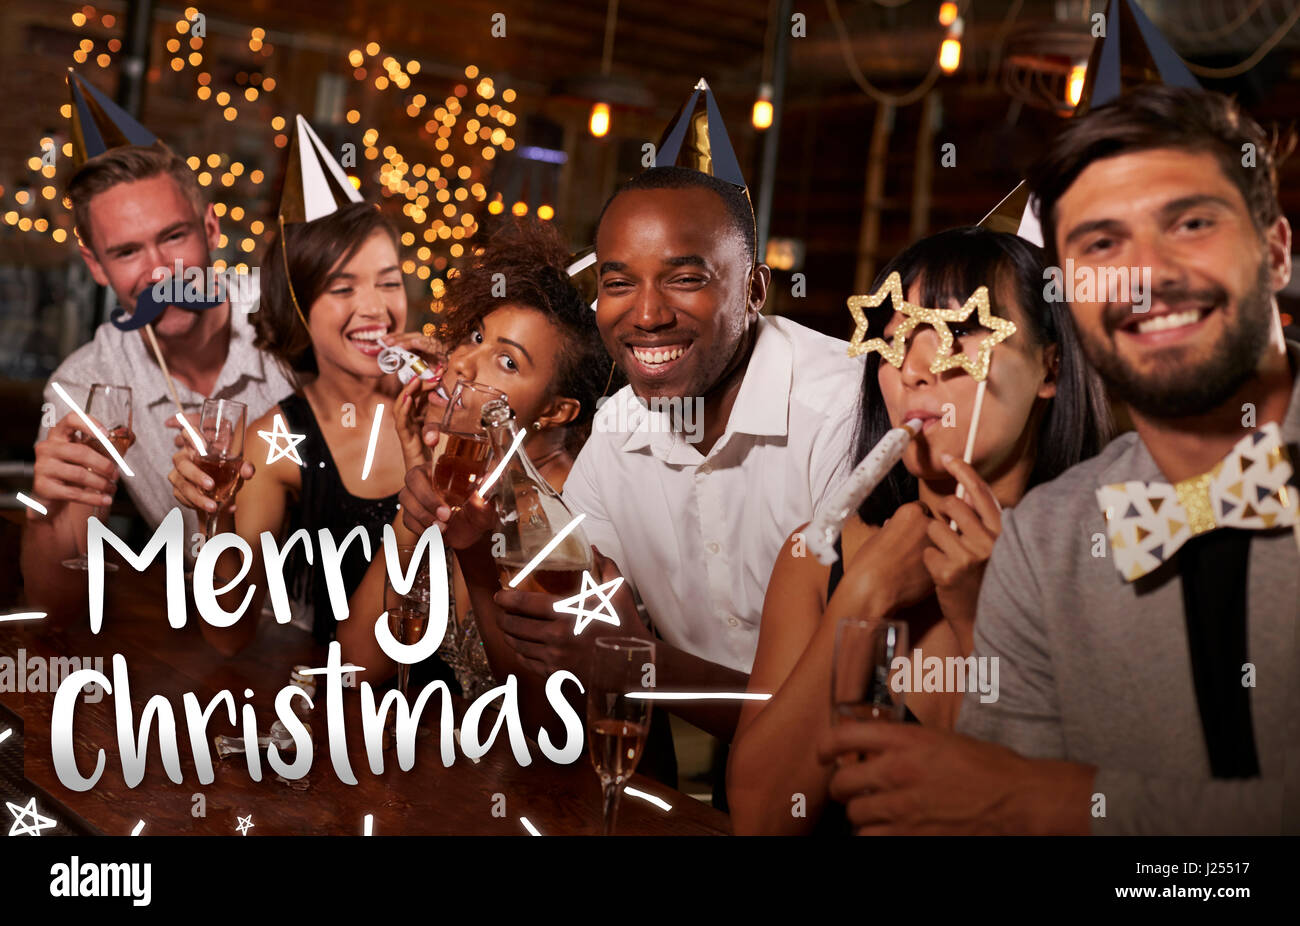 Friends at a party in a bar with Merry Christmas message Stock Photo